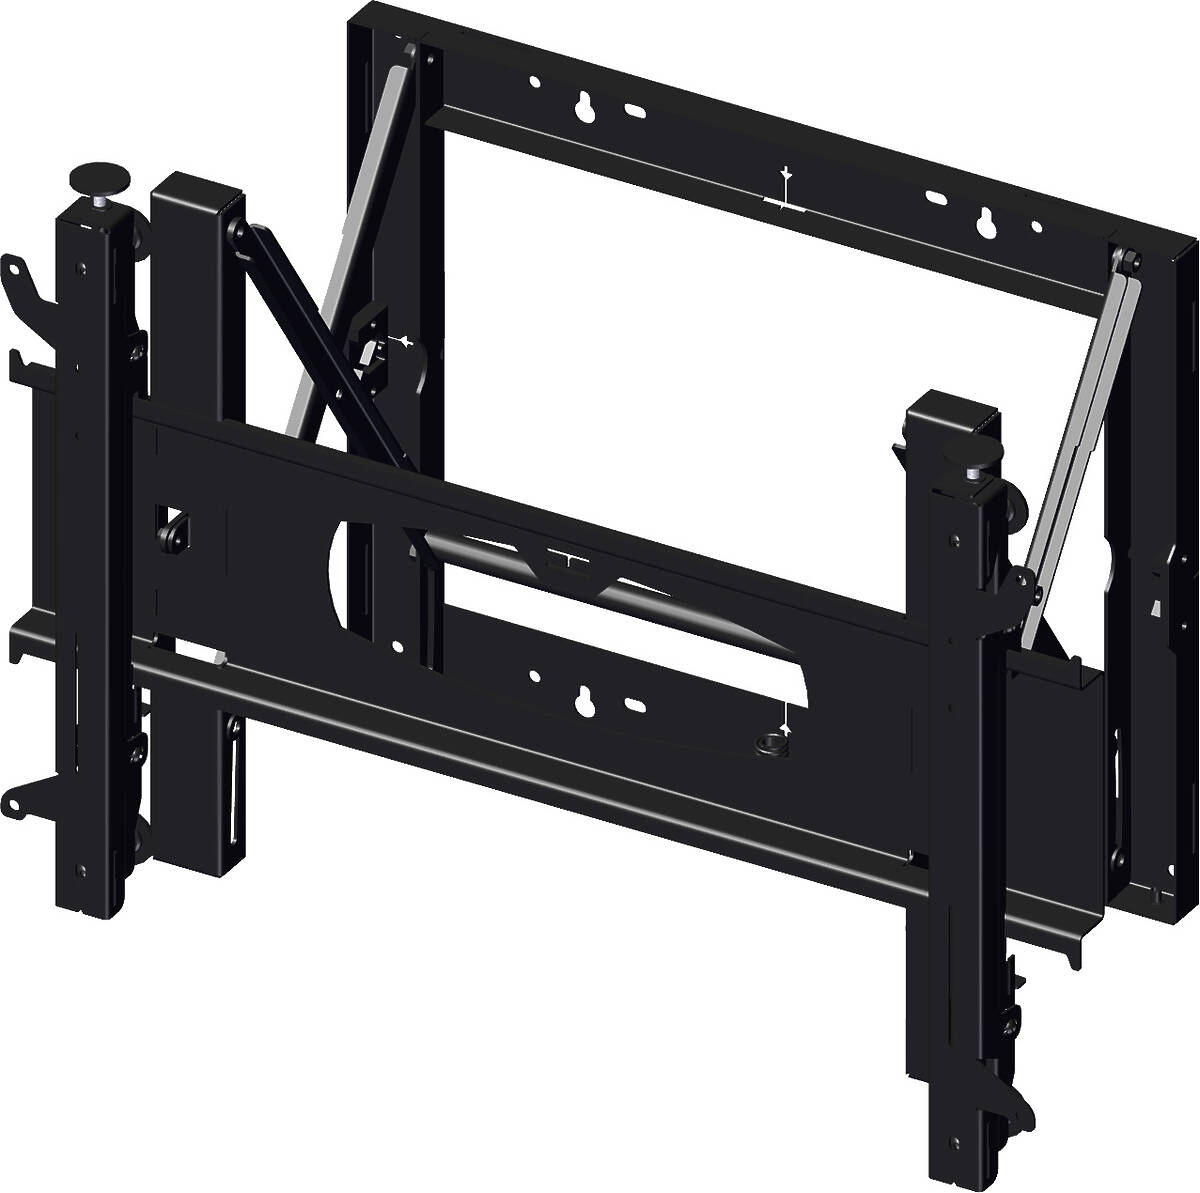 Unicol VWP3 Adapta Landscape large video wall mount product image. Click to enlarge.